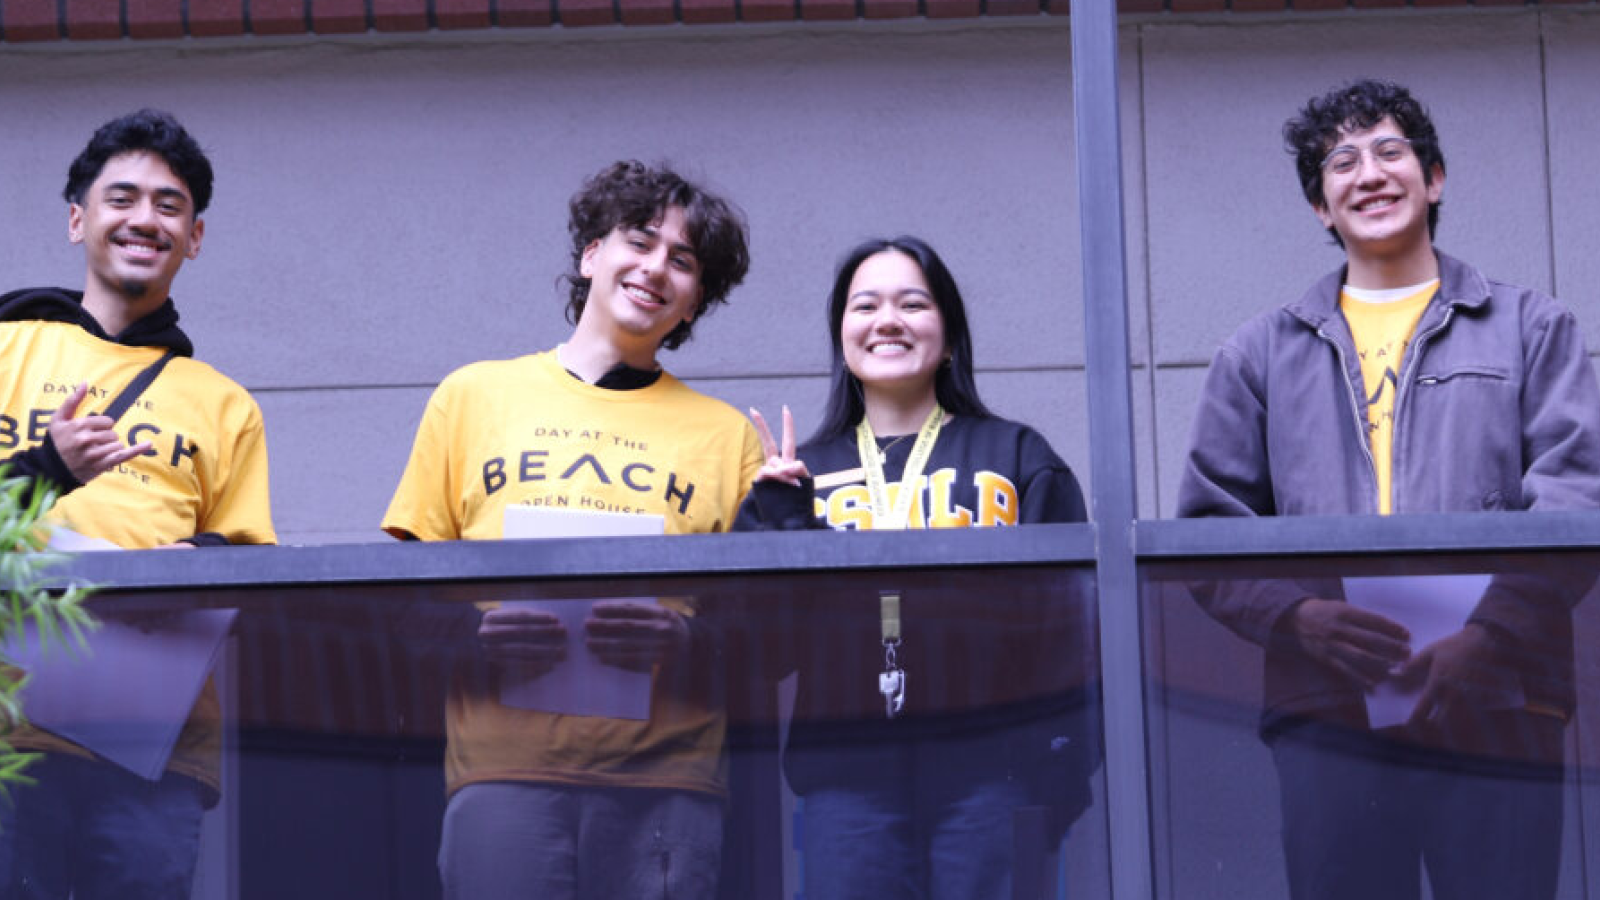 Emma Nguyen and Beach XP students inviting prospective students to learn about the College of Business BeachXP program for First Time First Year students